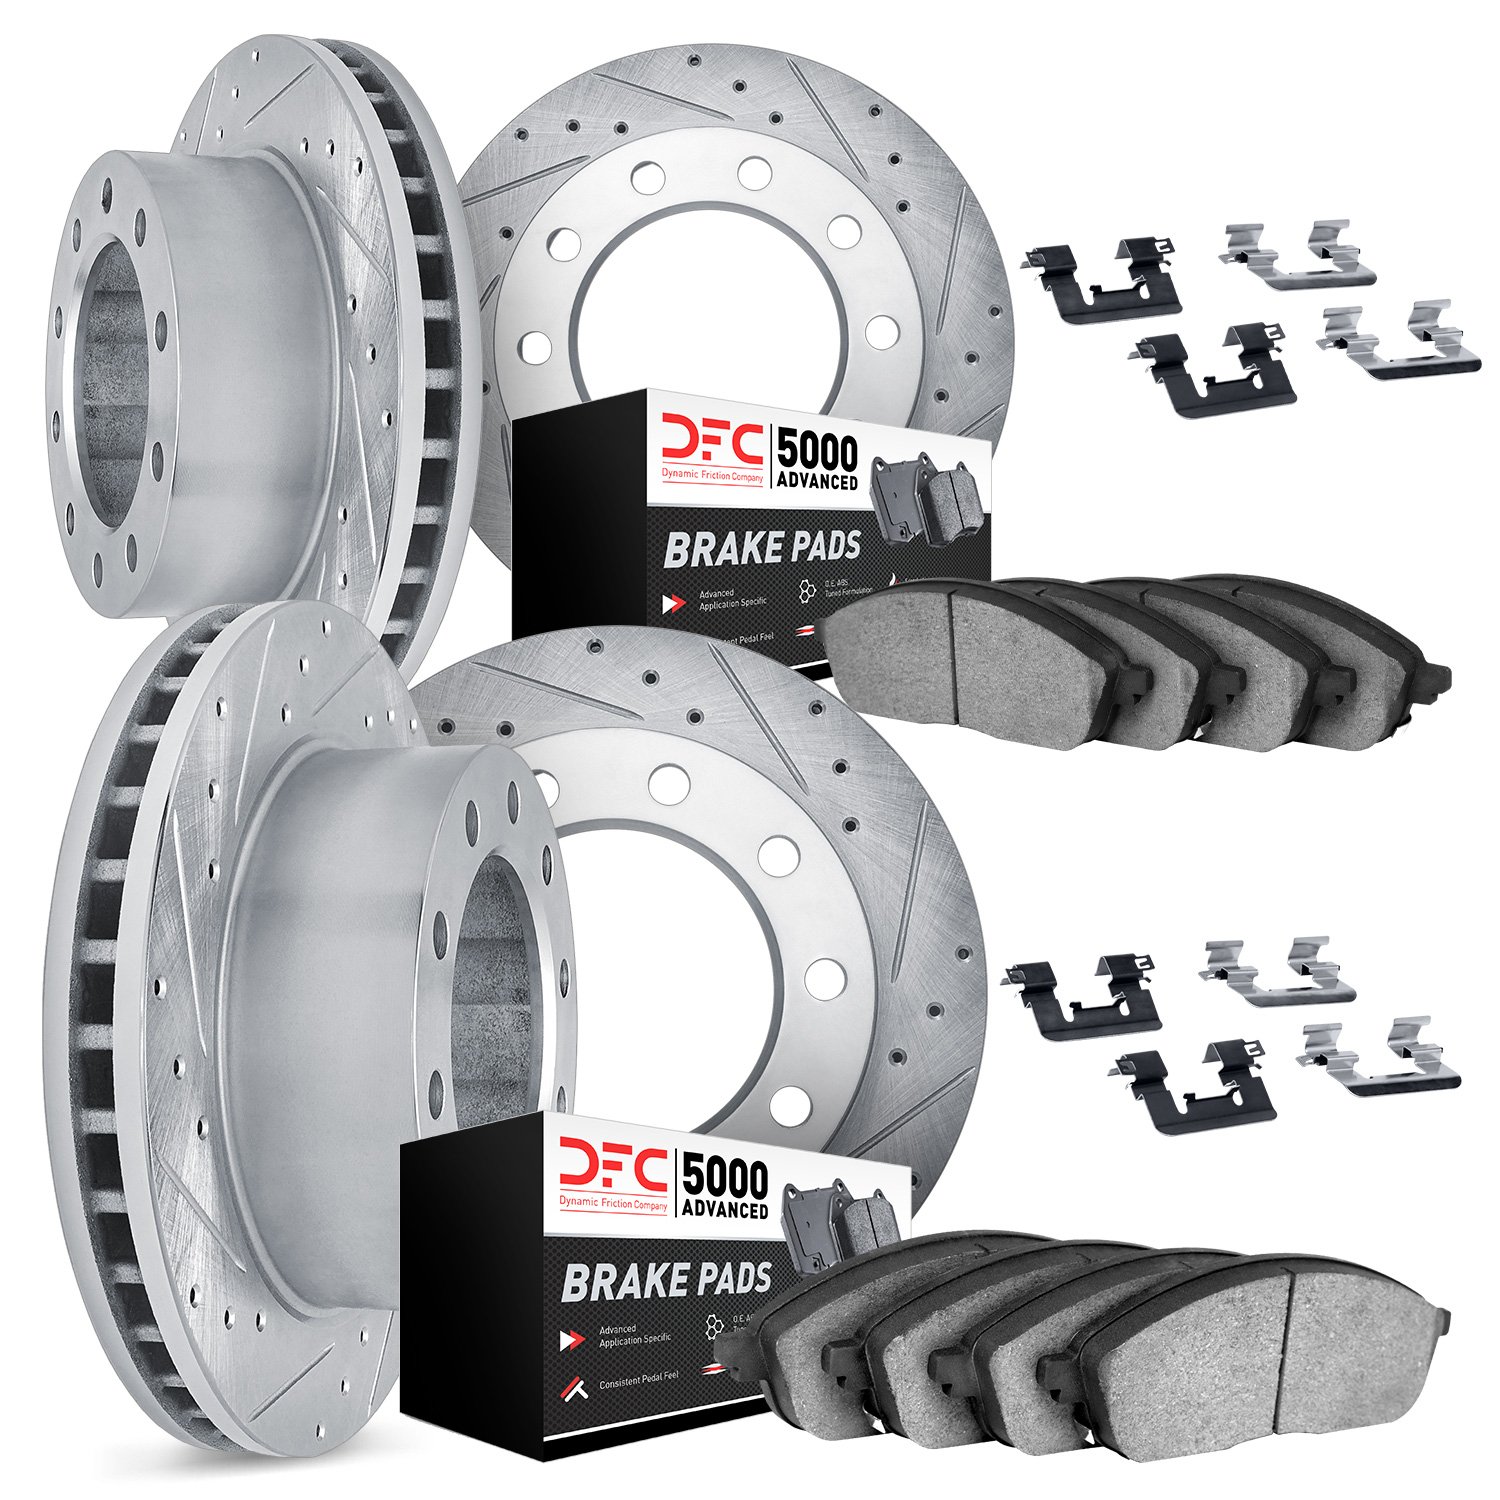 7514-54410 Drilled/Slotted Brake Rotors w/5000 Advanced Brake Pads Kit & Hardware [Silver], Fits Select Ford/Lincoln/Mercury/Maz